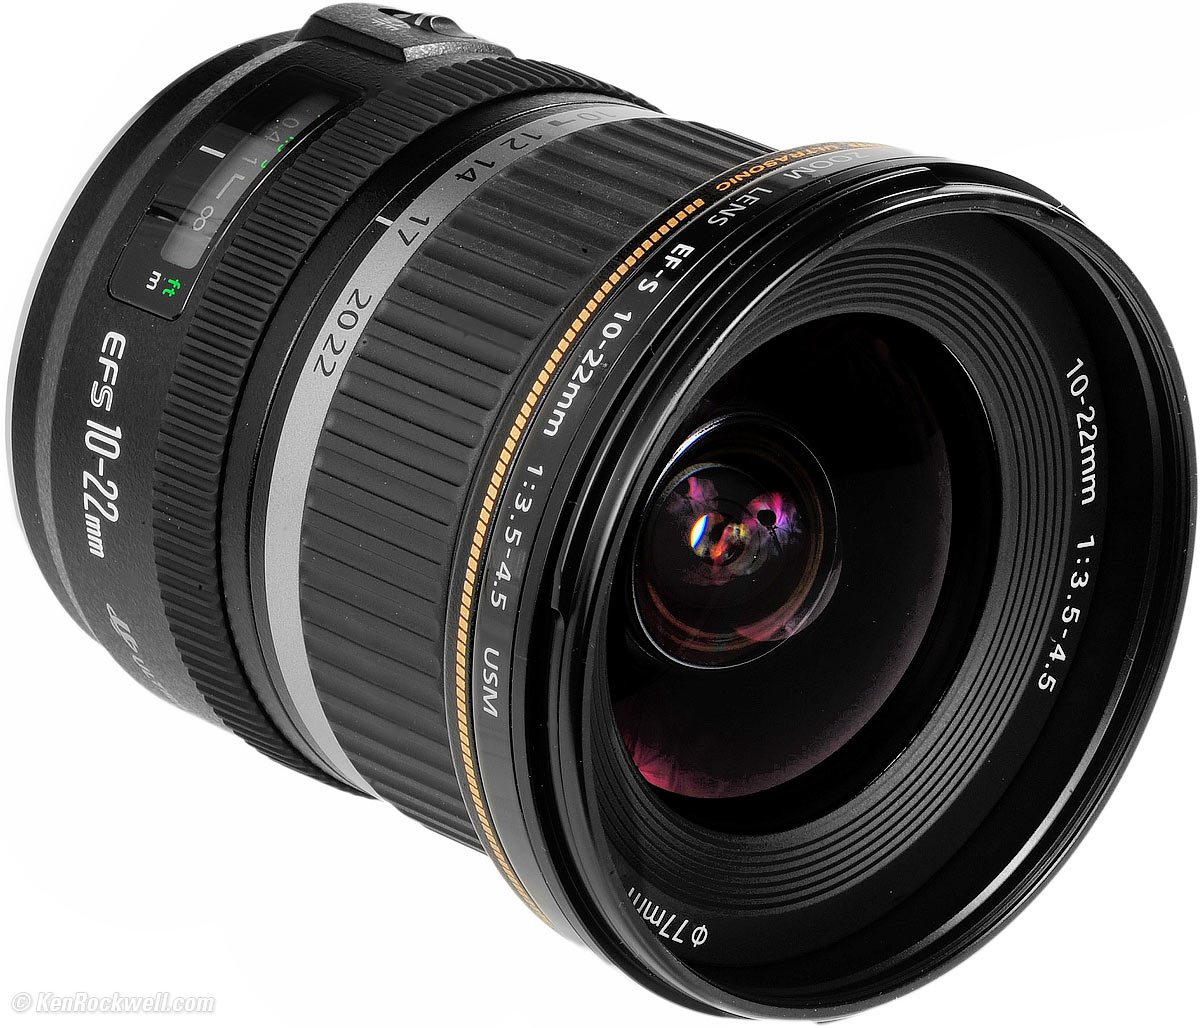 Canon 10-22mm Review